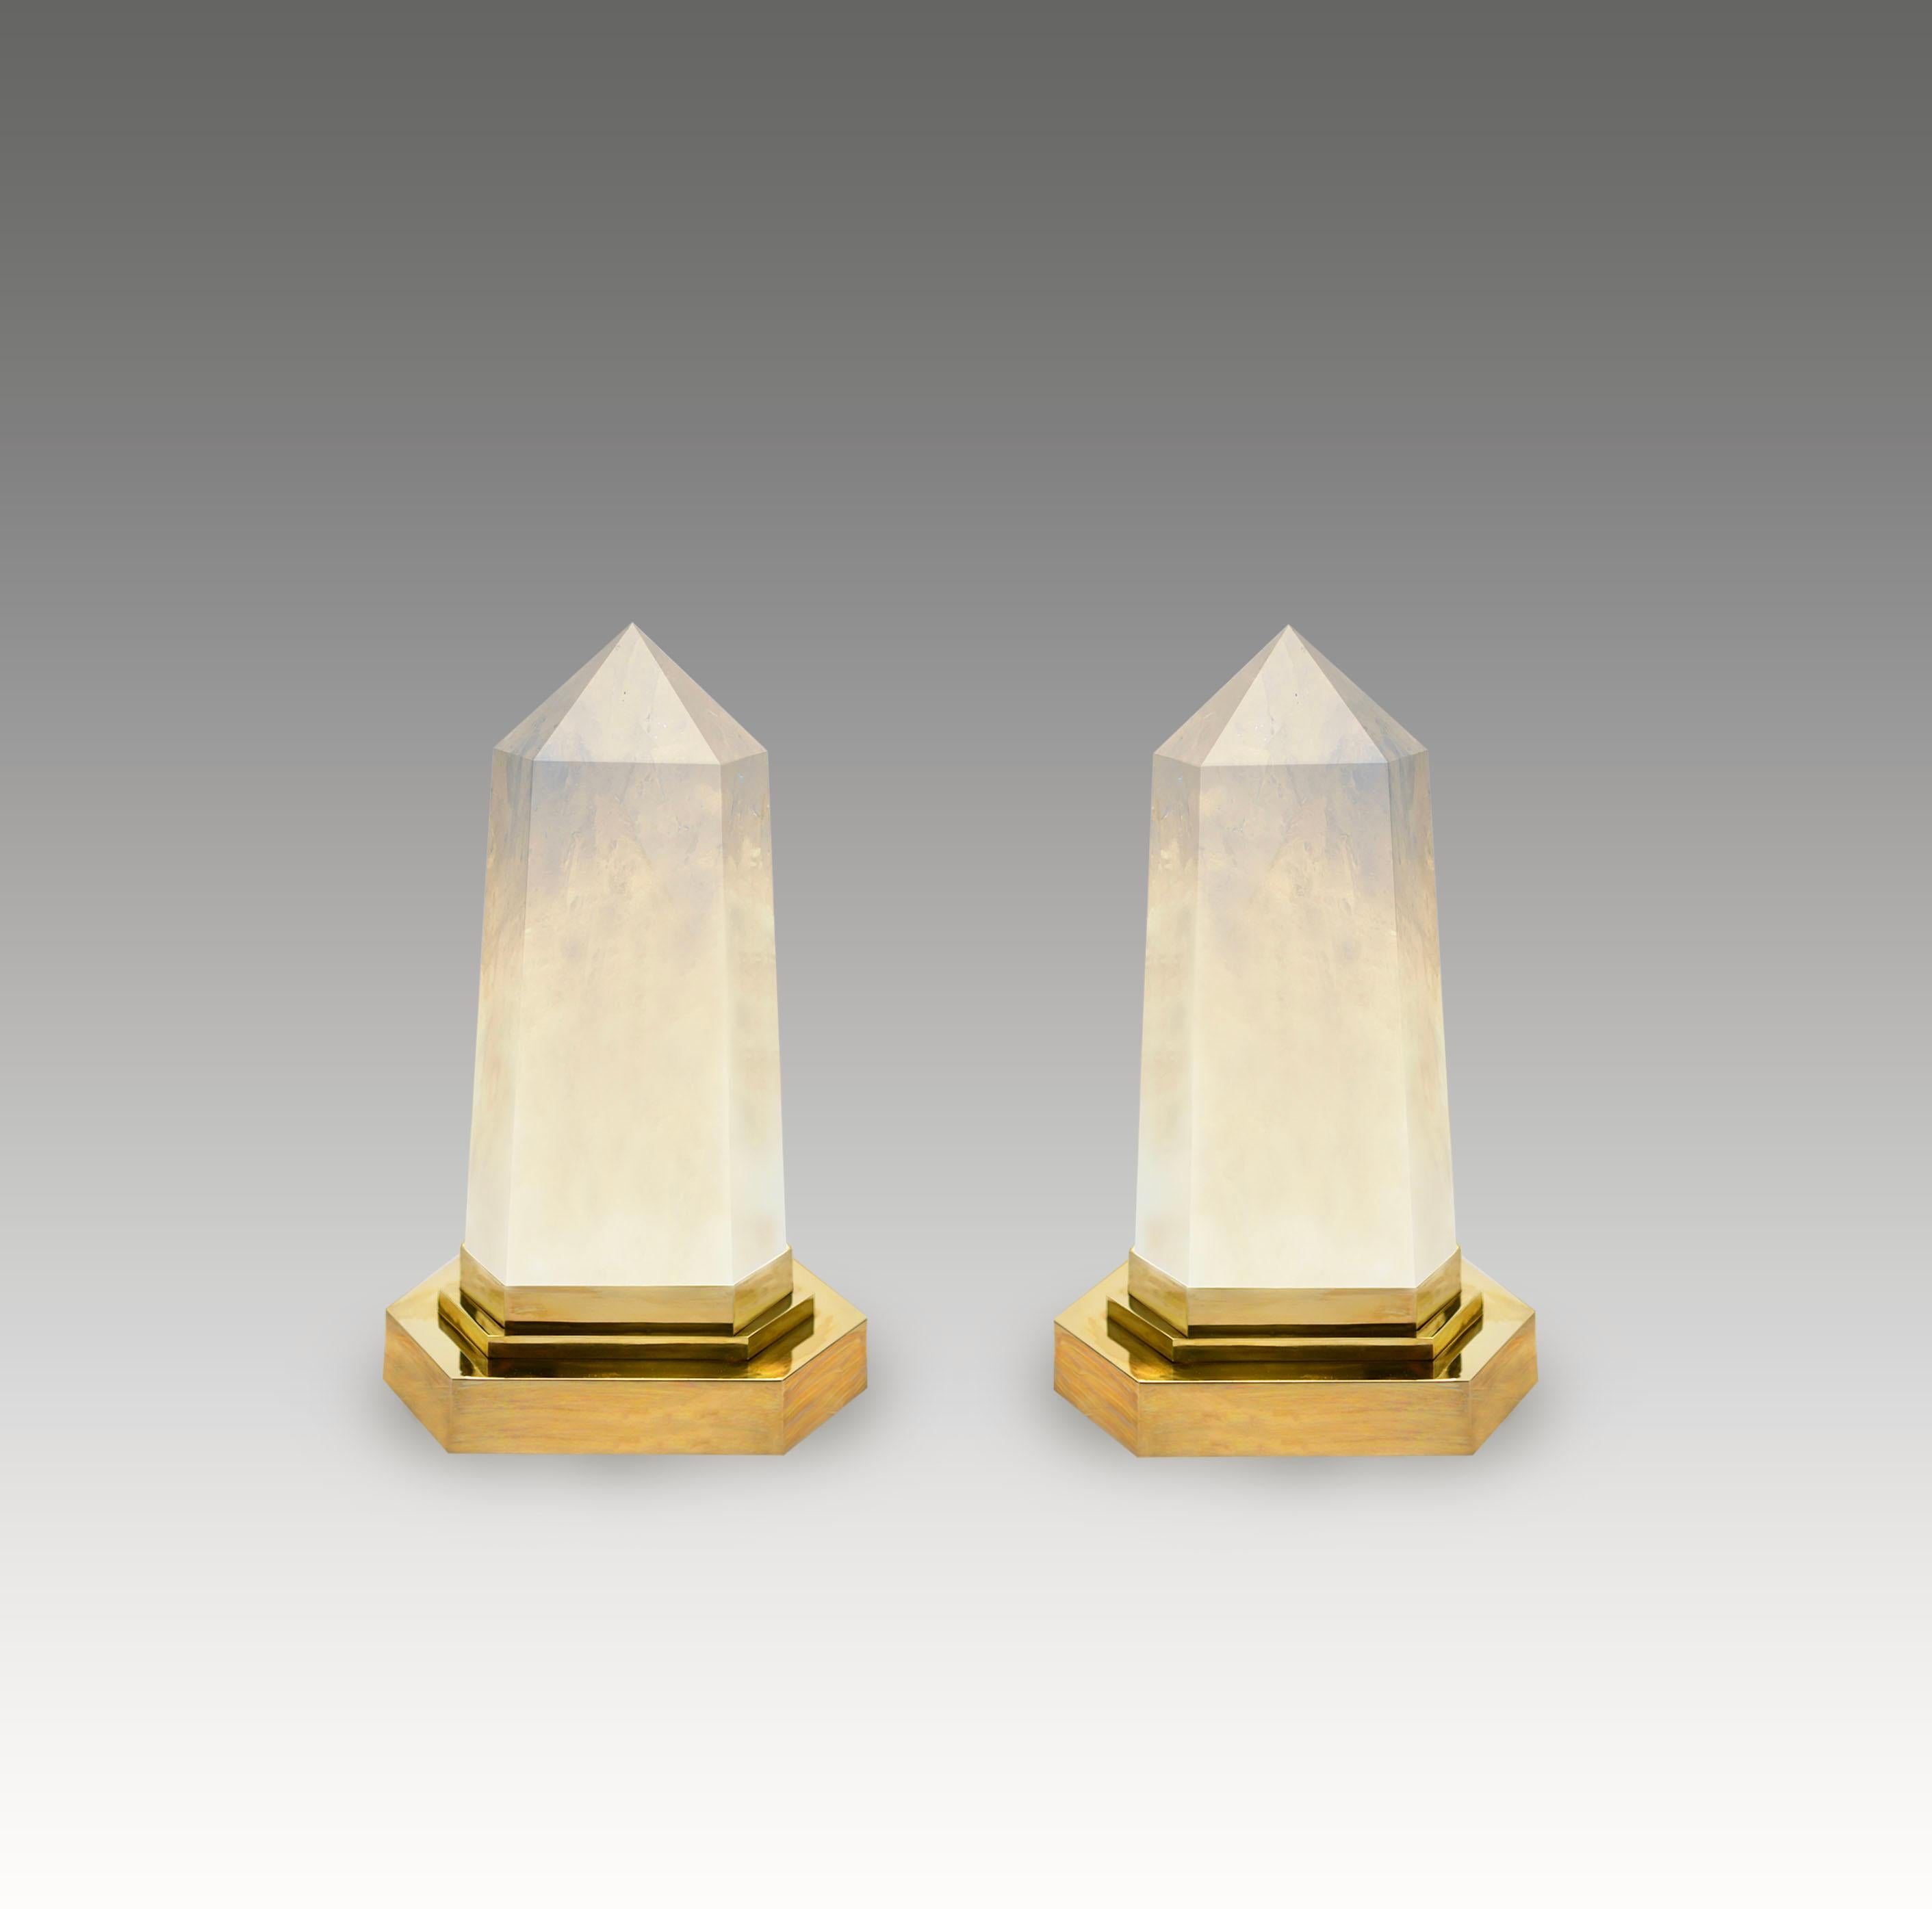 Pair of rock crystal obelisk lights with a polished brass bases. Created by Phoenix Gallery, NYC. 
Two sockets installed. Supply two led warm lights. 120w max.
Custom size available.